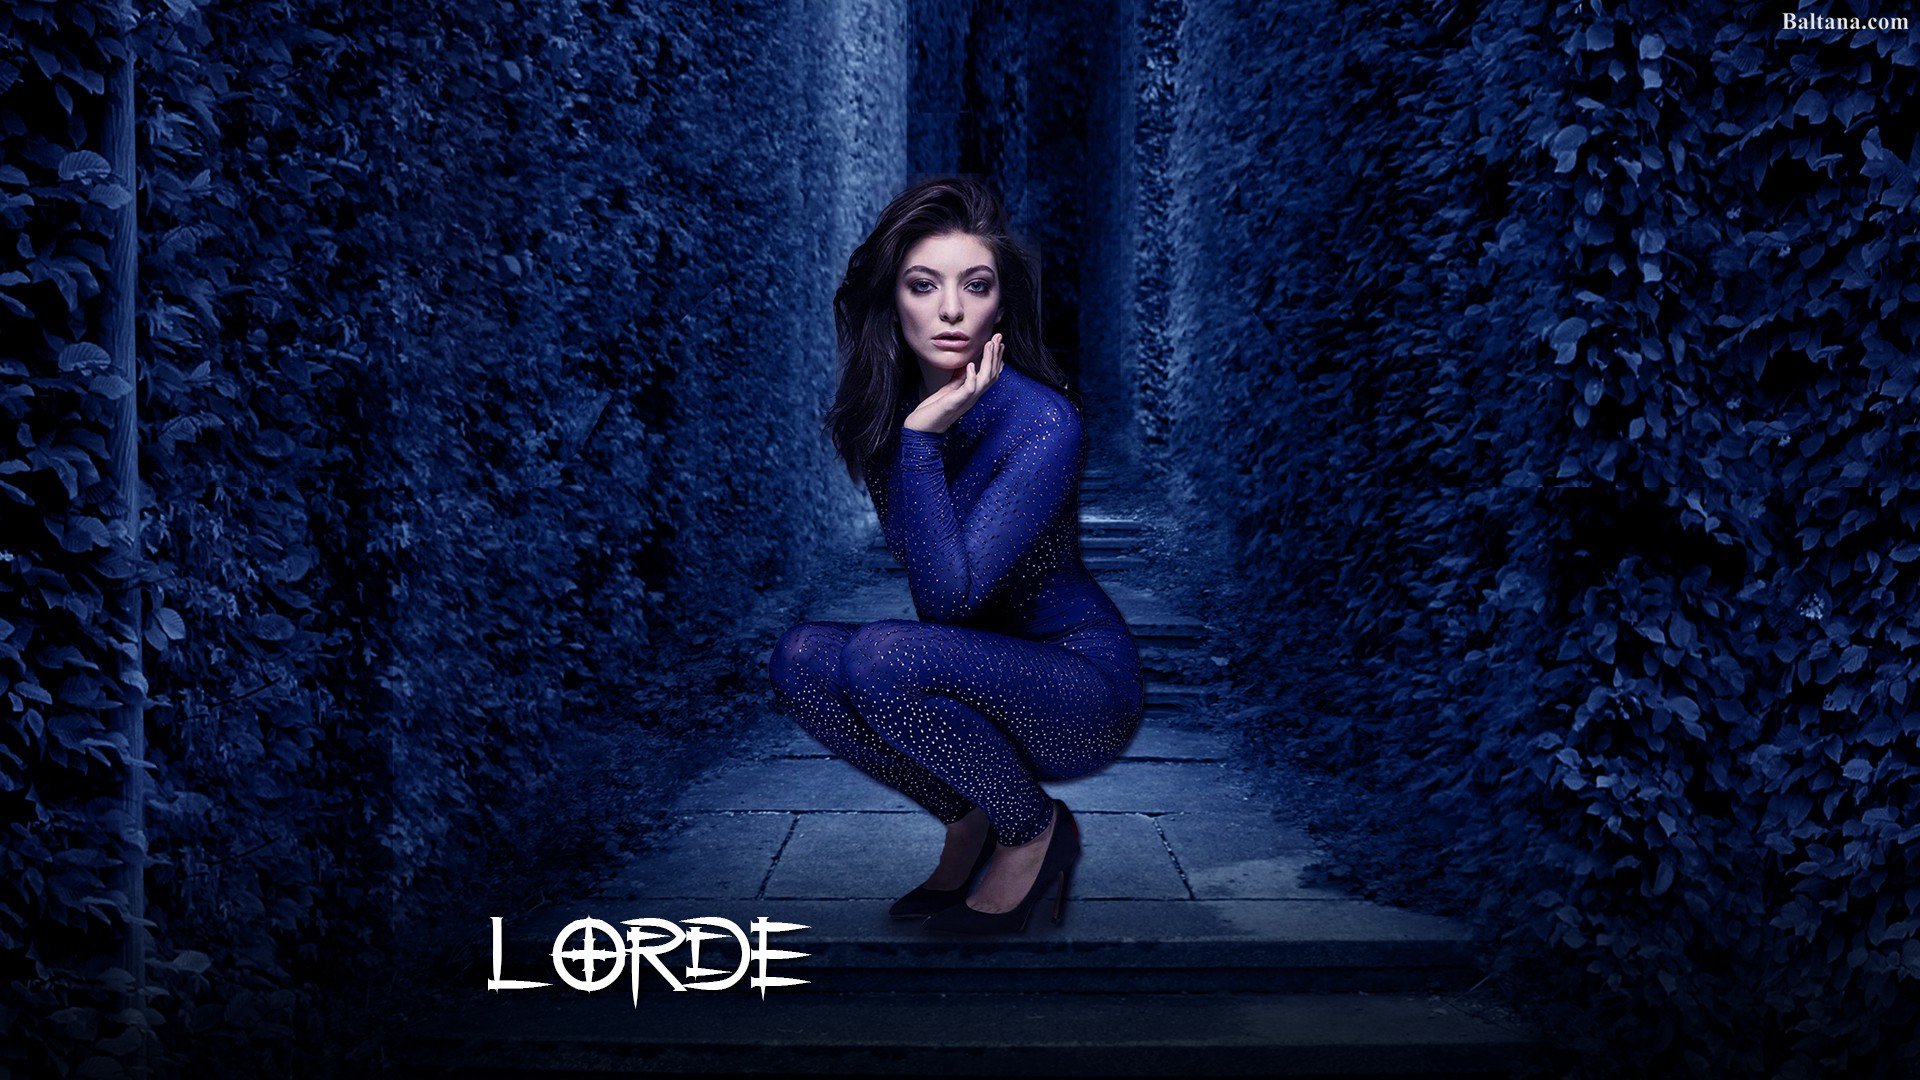 Lorde Wallpaper HD Background Image Pics Photos